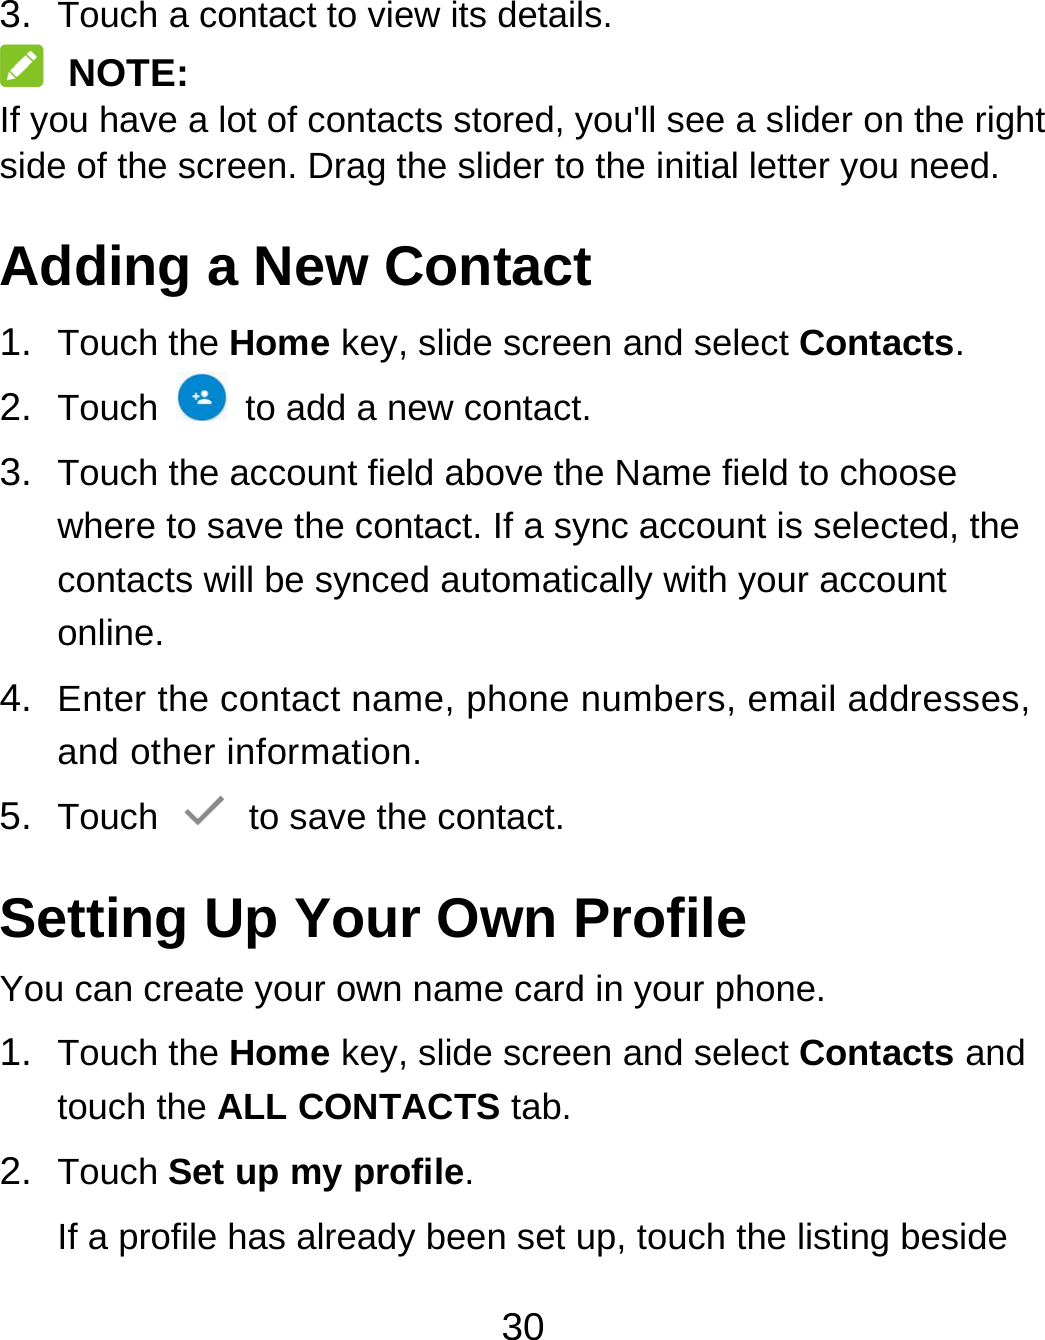 30 3.  Touch a contact to view its details.  NOTE: If you have a lot of contacts stored, you&apos;ll see a slider on the right side of the screen. Drag the slider to the initial letter you need. Adding a New Contact 1.  Touch the Home key, slide screen and select Contacts. 2.  Touch    to add a new contact. 3.  Touch the account field above the Name field to choose where to save the contact. If a sync account is selected, the contacts will be synced automatically with your account online. 4.  Enter the contact name, phone numbers, email addresses, and other information. 5.  Touch   to save the contact. Setting Up Your Own Profile You can create your own name card in your phone. 1.  Touch the Home key, slide screen and select Contacts and touch the ALL CONTACTS tab. 2.  Touch Set up my profile. If a profile has already been set up, touch the listing beside 